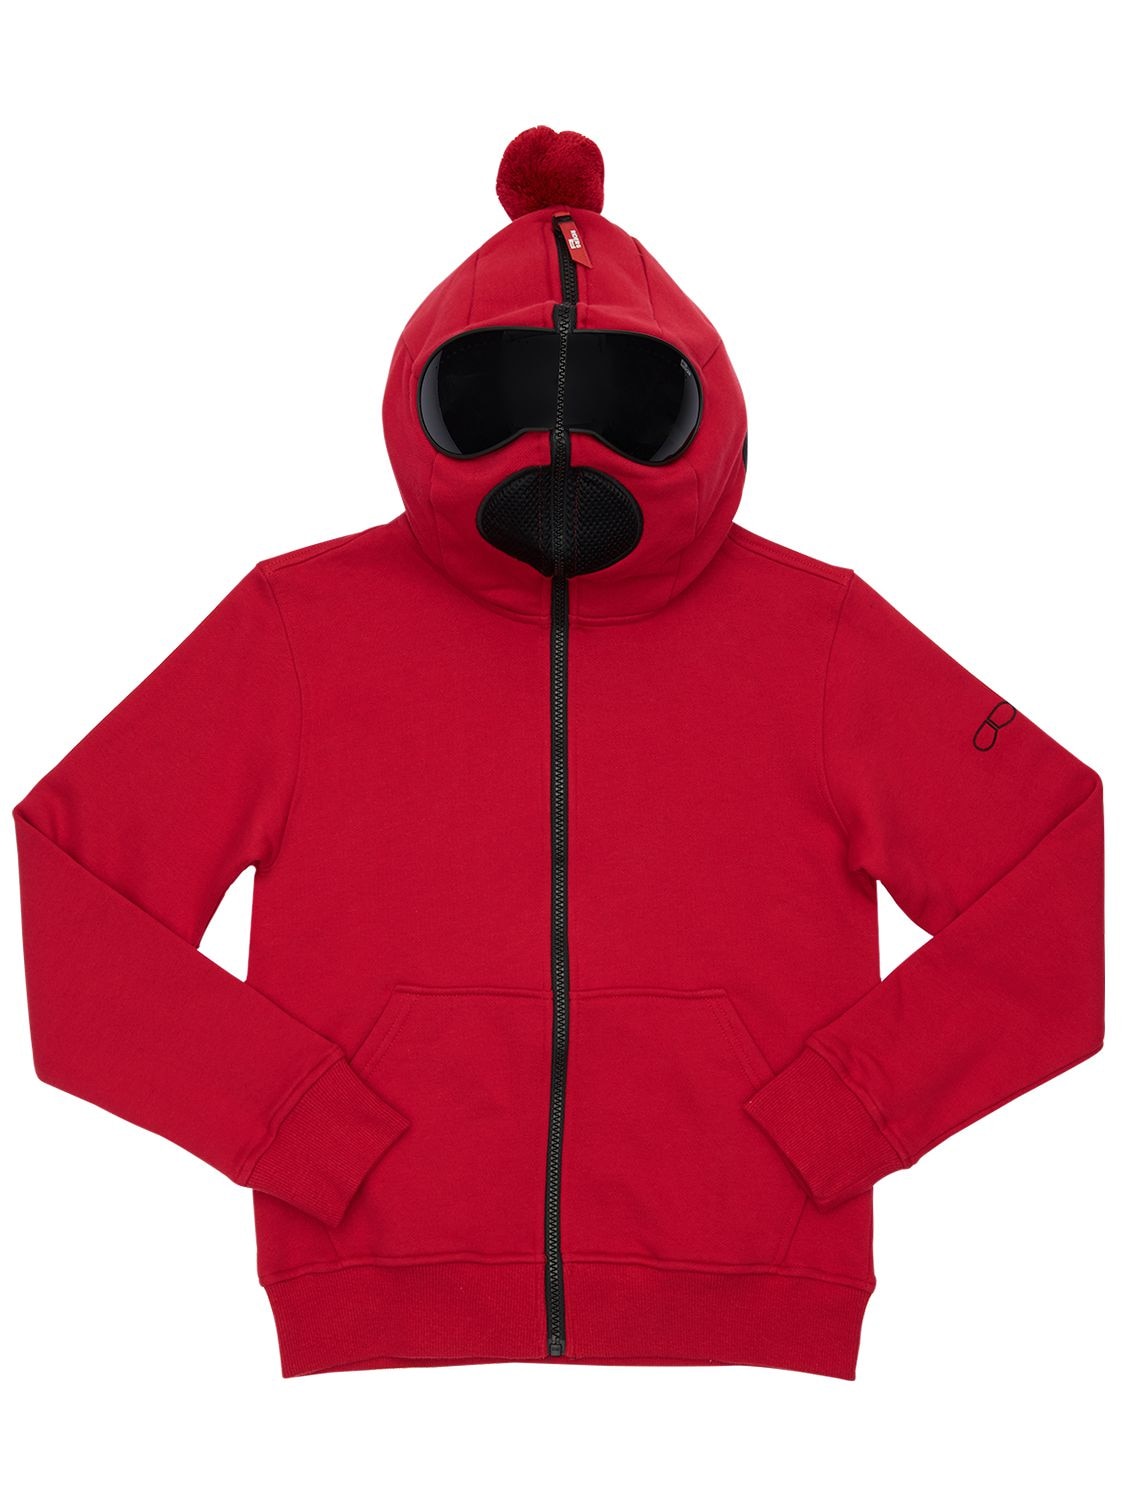 Ai Riders On The Storm Kids' Zip-up Cotton Sweatshirt Hoodie In Red